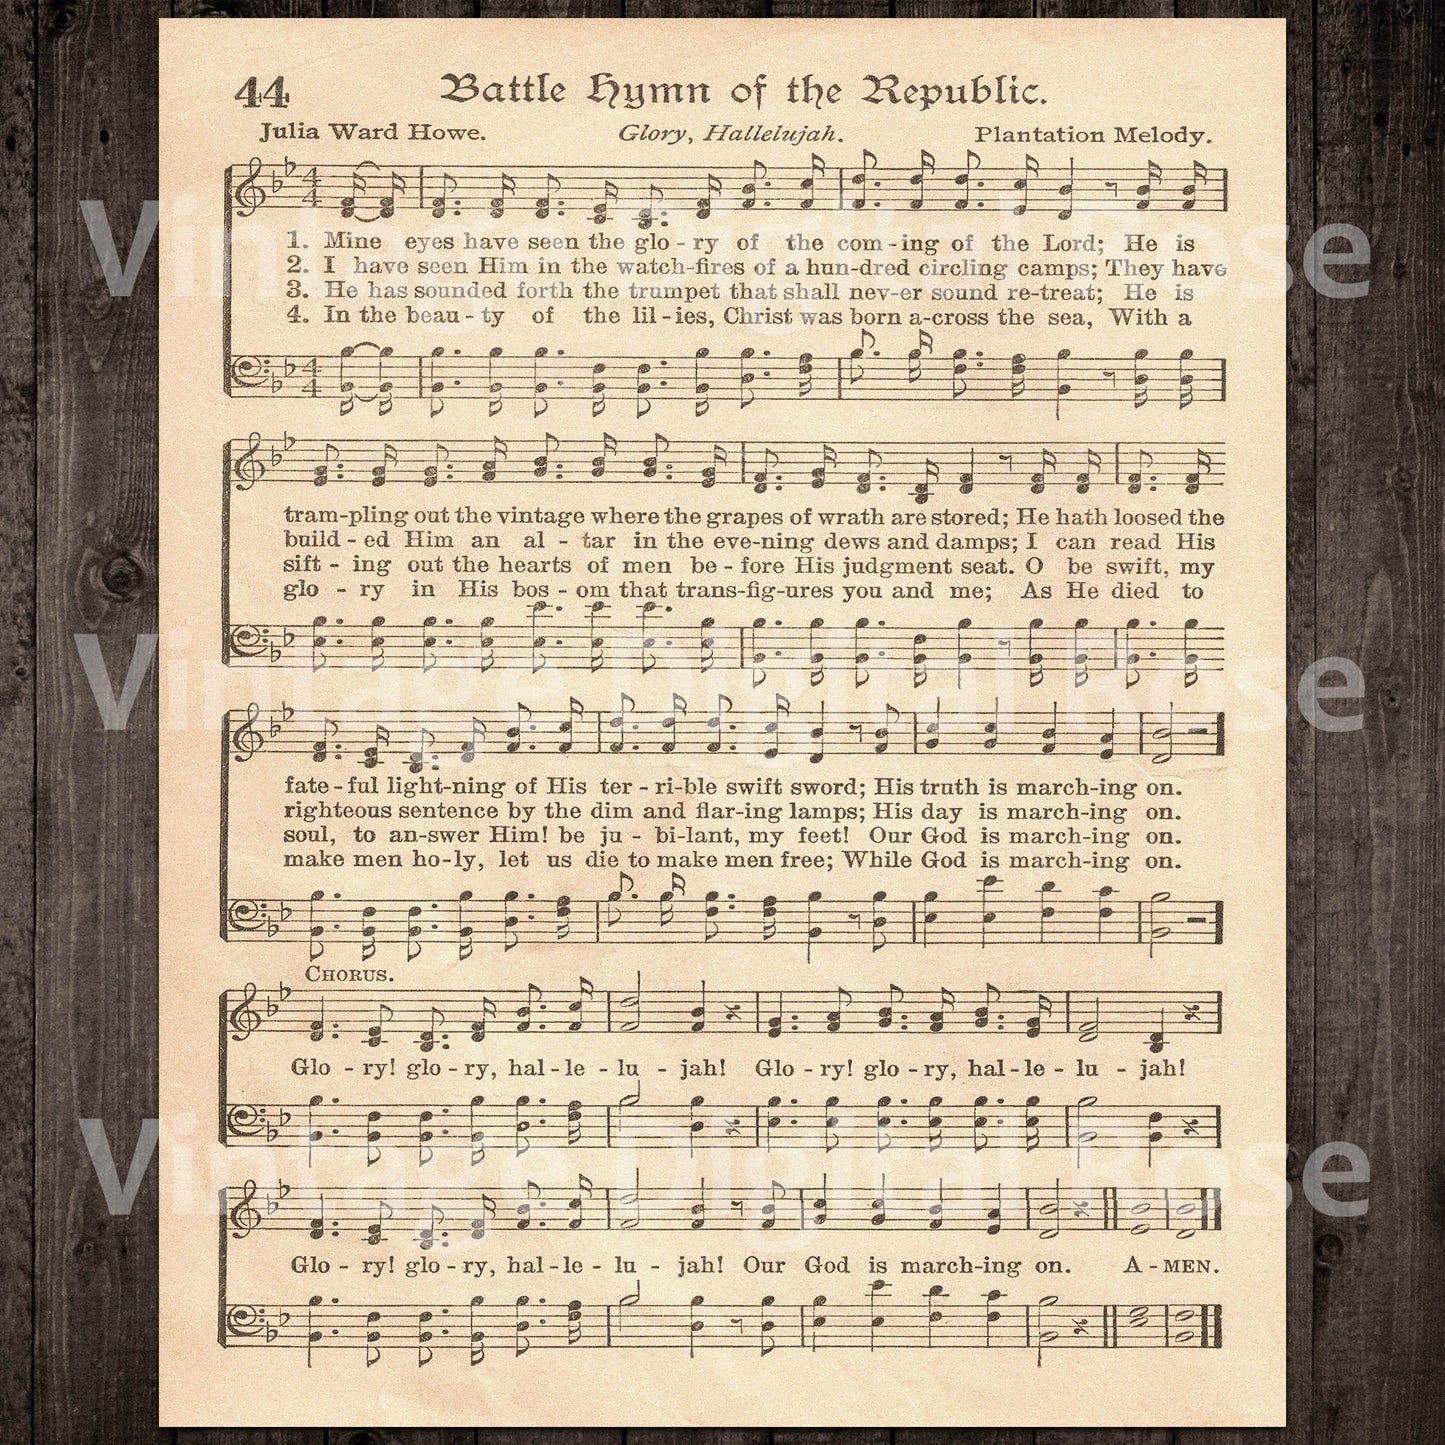 Printable Vintage Patriotic Sheet Music - Star Spangled Banner, America the Beautiful, Battle Hymn of the Republic, My Country, 'Tis of Thee